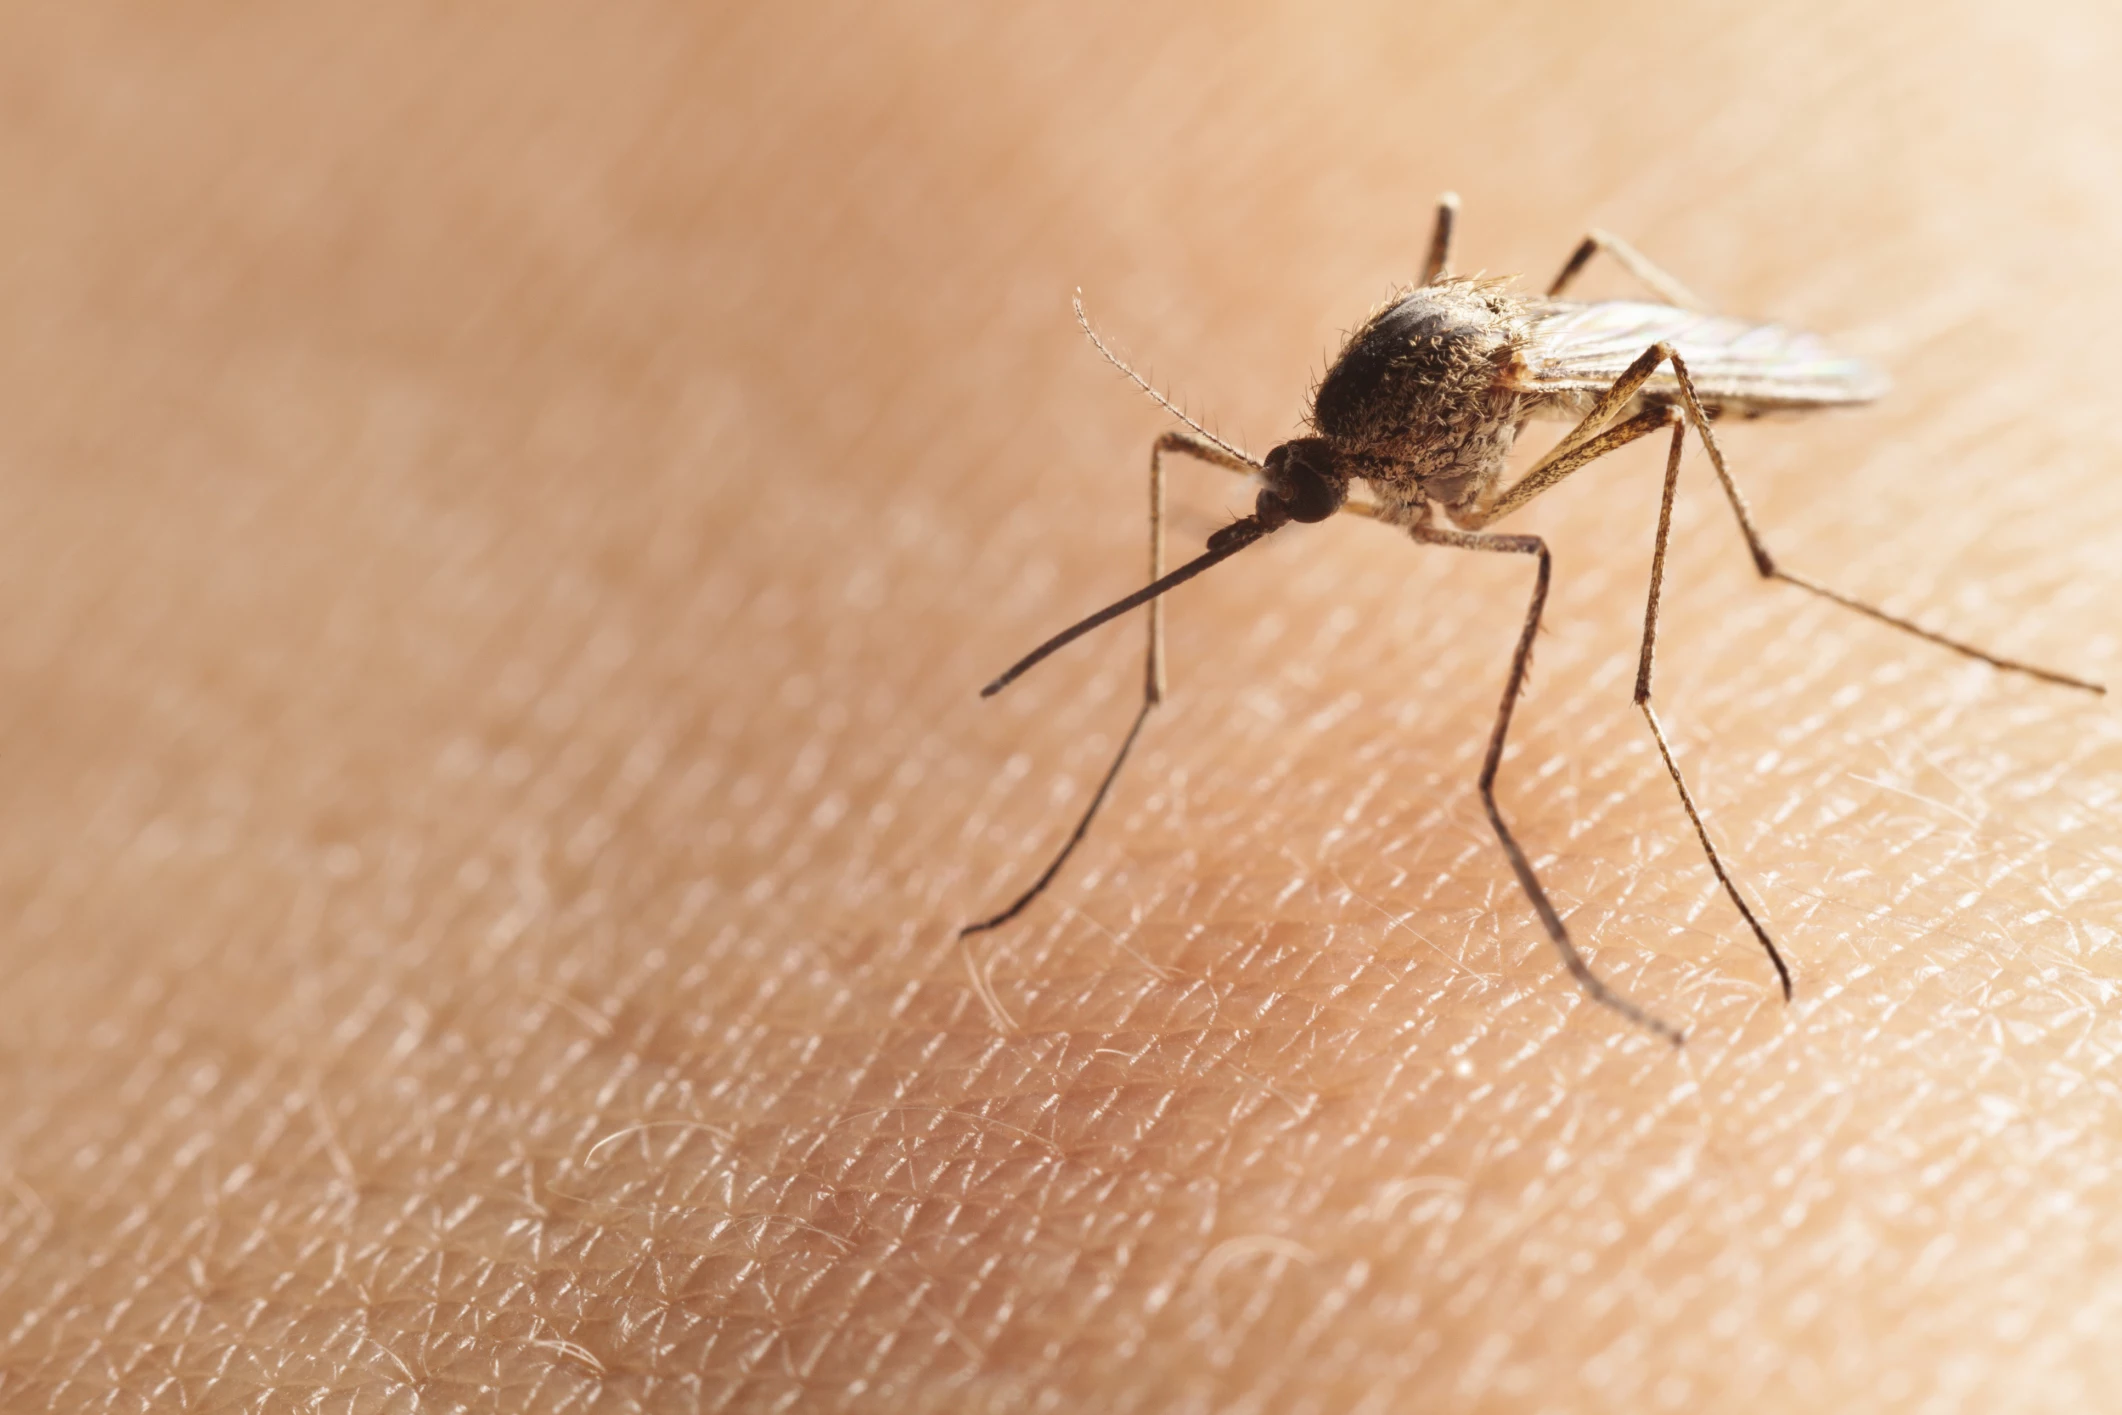 Why There Are So Many Mosquitoes Eating You Alive Right Now?